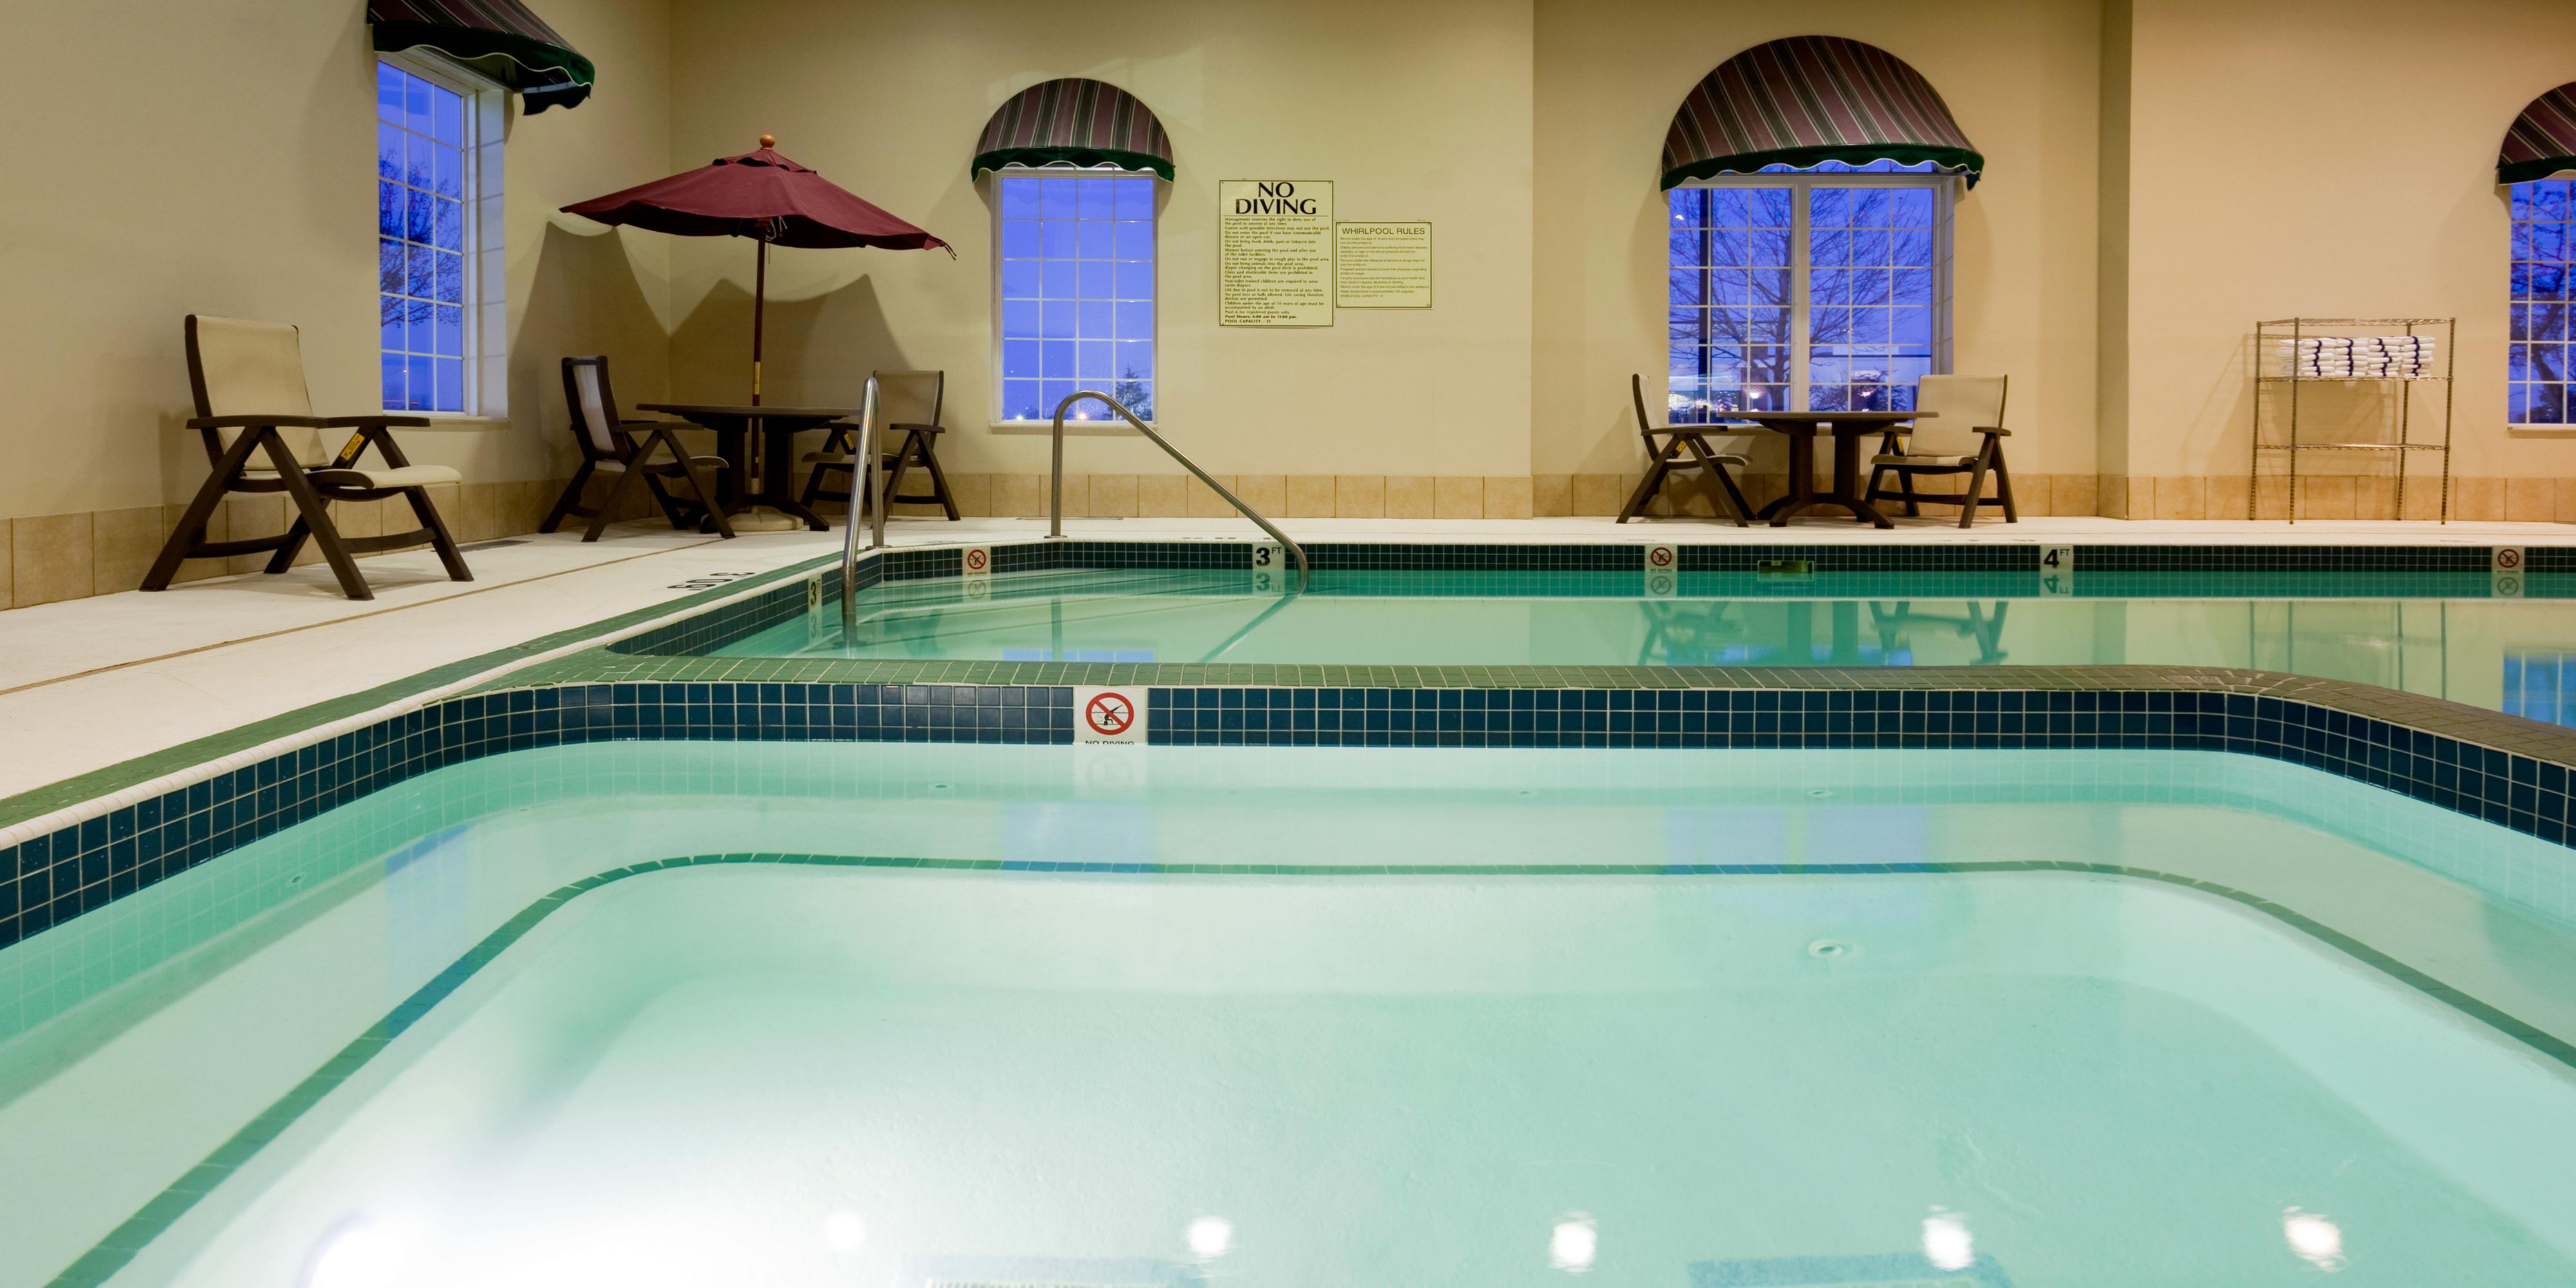 Be sure to take the time to enjoy our indoor pool during your stay.  What a great way to relax, have fun, or get some exercise while traveling. 